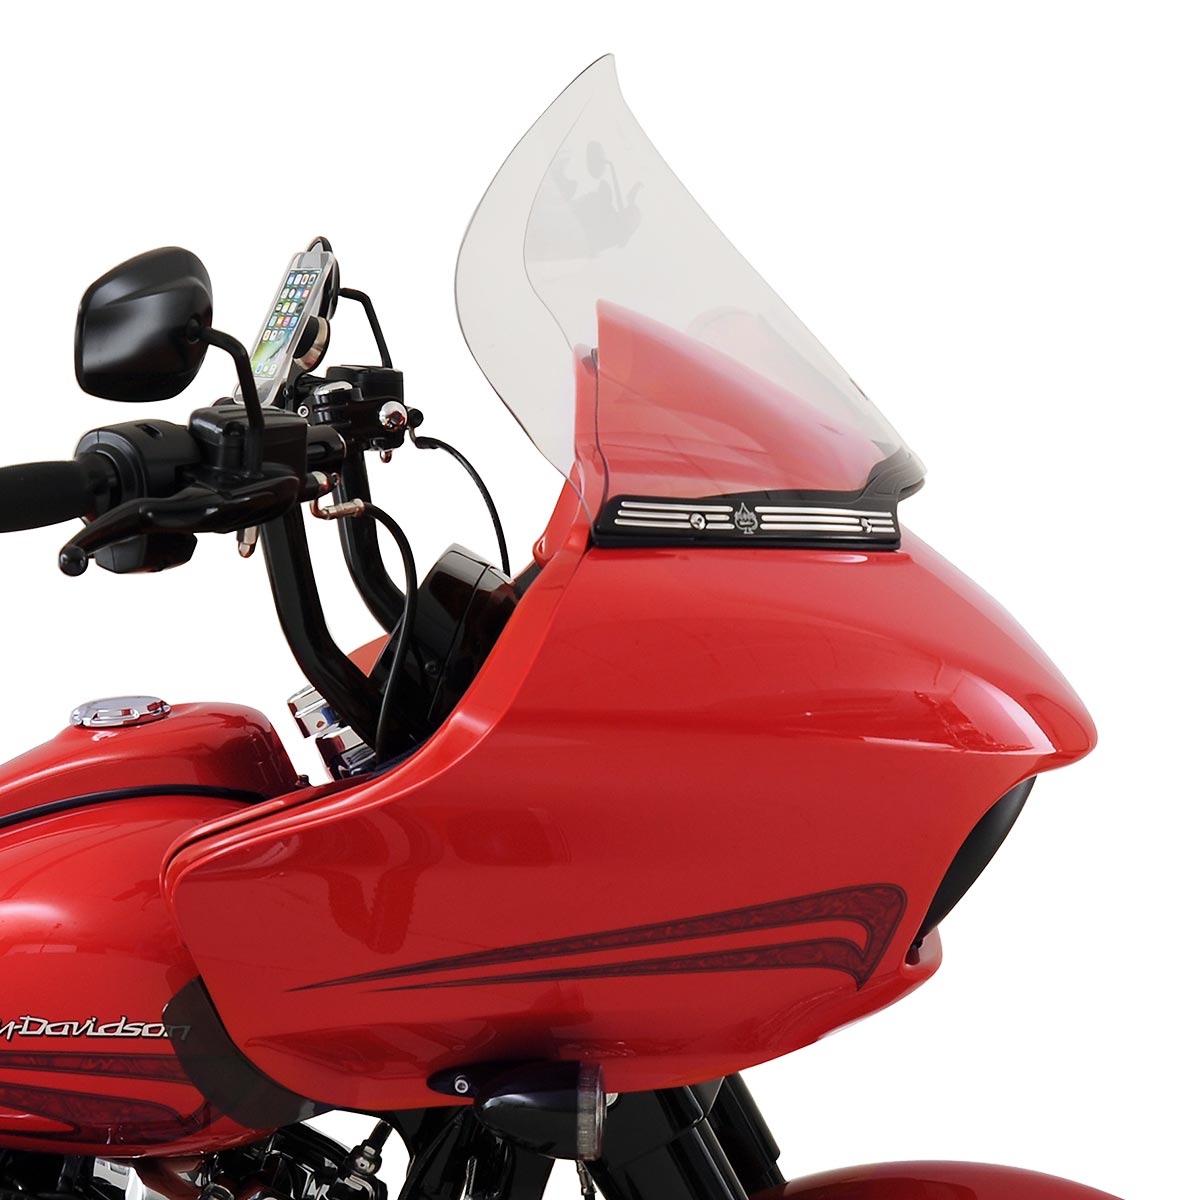 15" Pro-Touring Clear Flare™ Windshields for Harley-Davidson 2015-2023 Road Glide motorcycle models